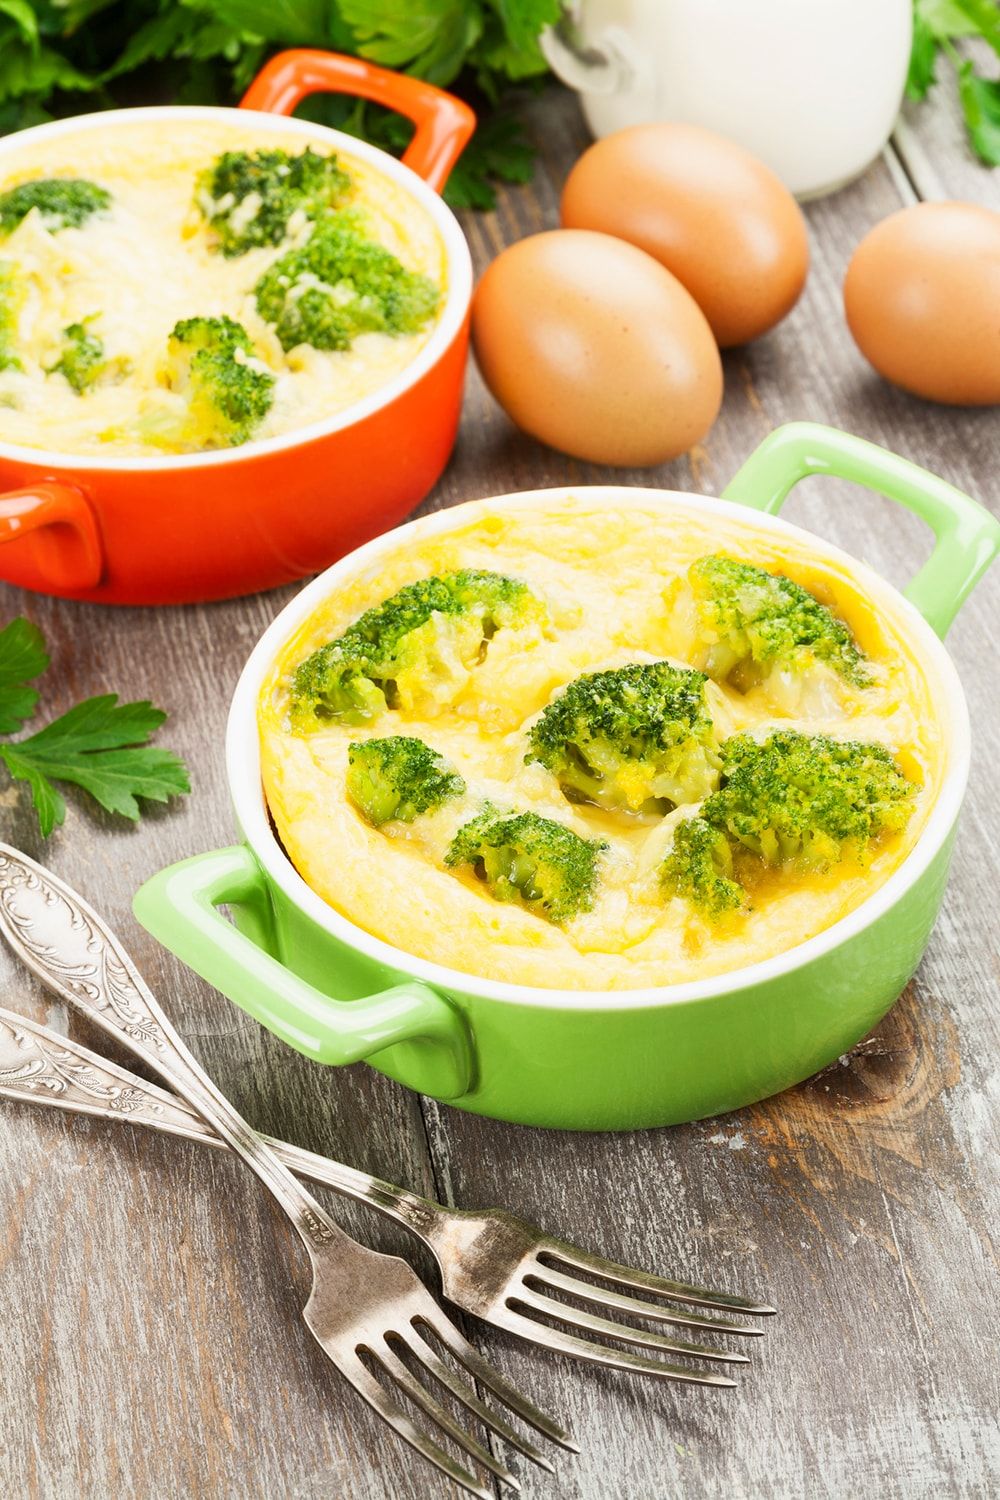 Microwave Omelet with Broccoli and Cheddar Cheese in a ramekin.